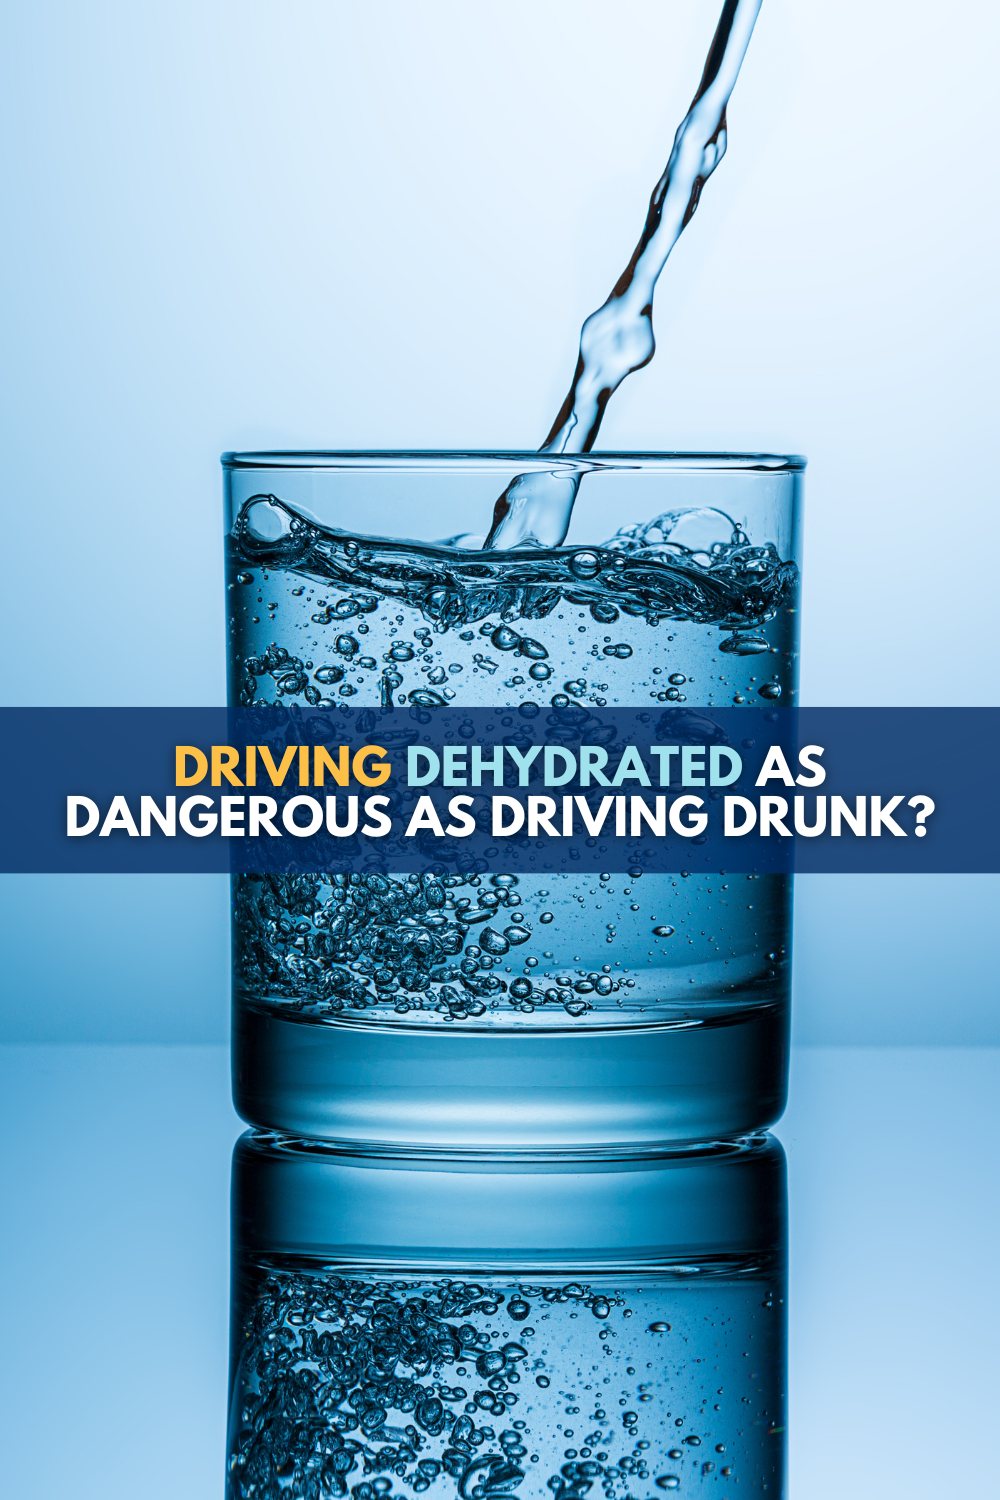 Can driving dehydrated be as dangerous as driving drunk?